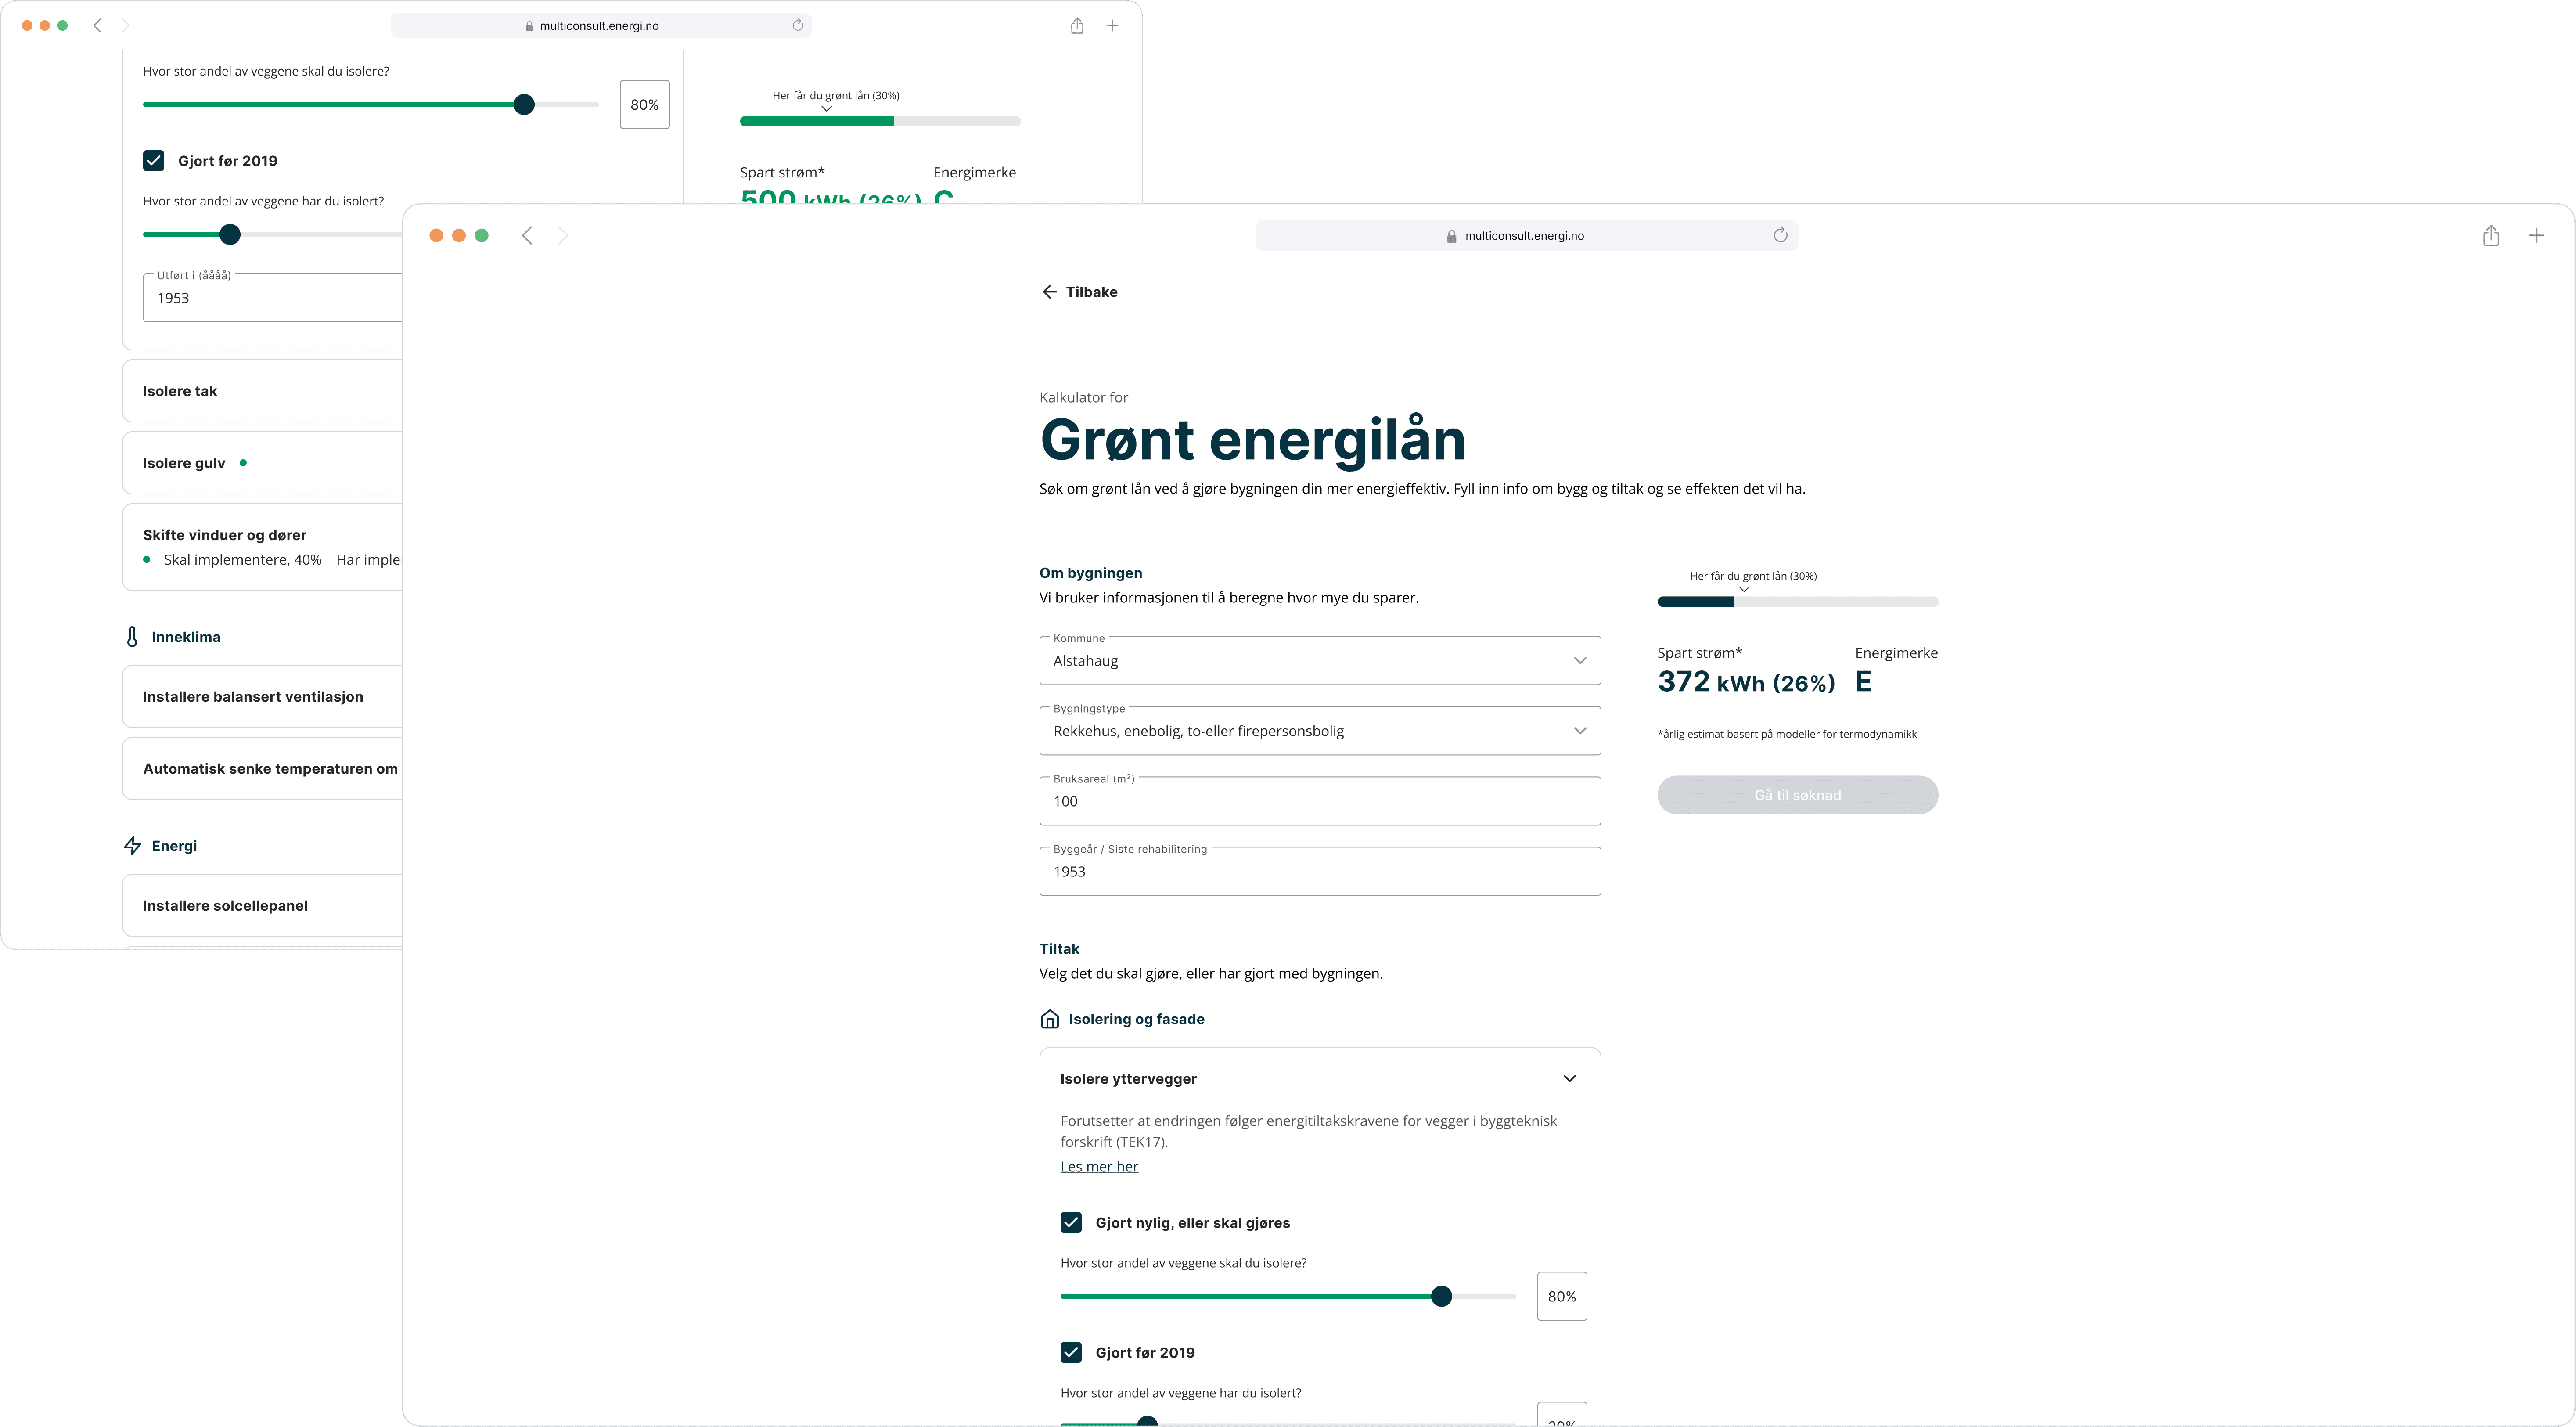 An image of two browser windows, showing the UI for the green energy calculator. White background, with checkboxes and a progress bar displaying the calculations visually.